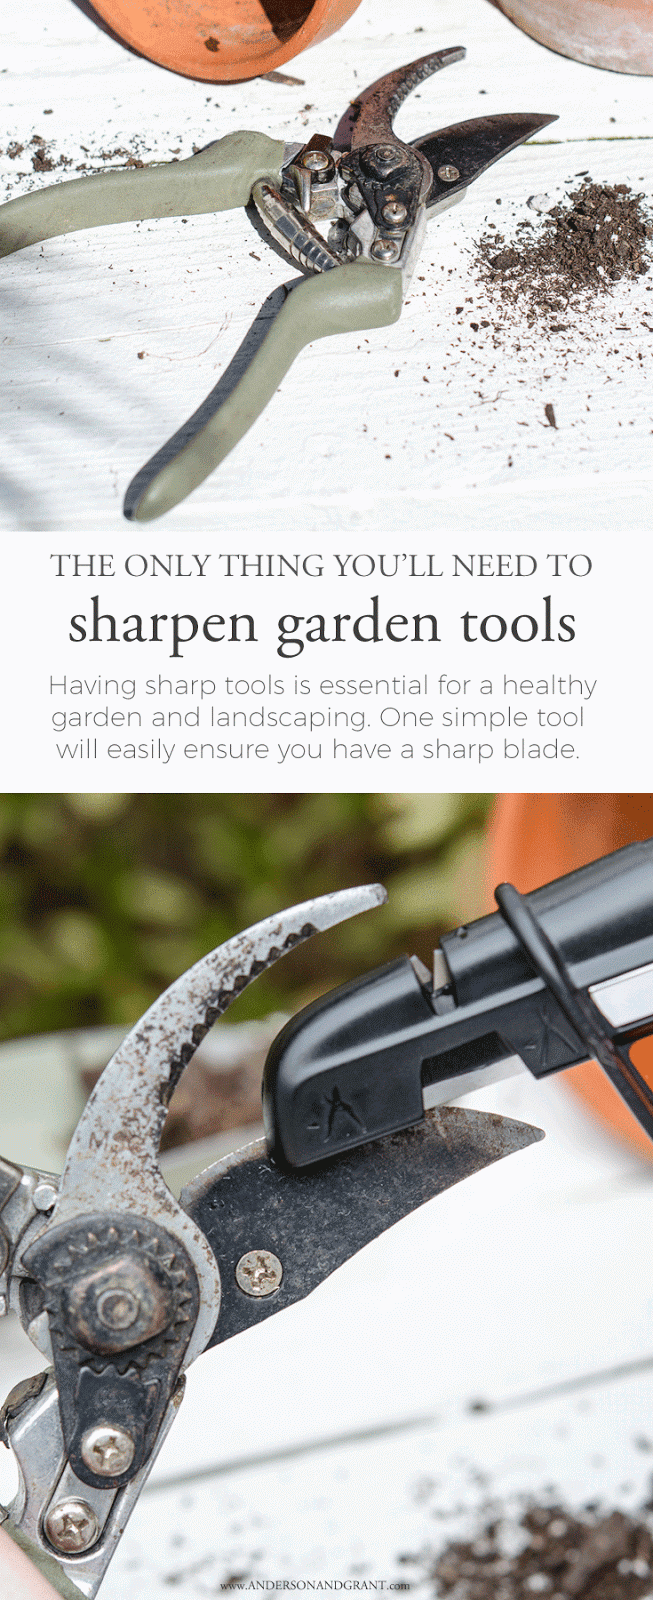 Keeping your garden tools sharp is important for the health of your garden and landscaping.   Find out about one simple gadget you can use to effortlessly maintain a sharp blade. #gardentools #usefultools #gardening #helpfultips